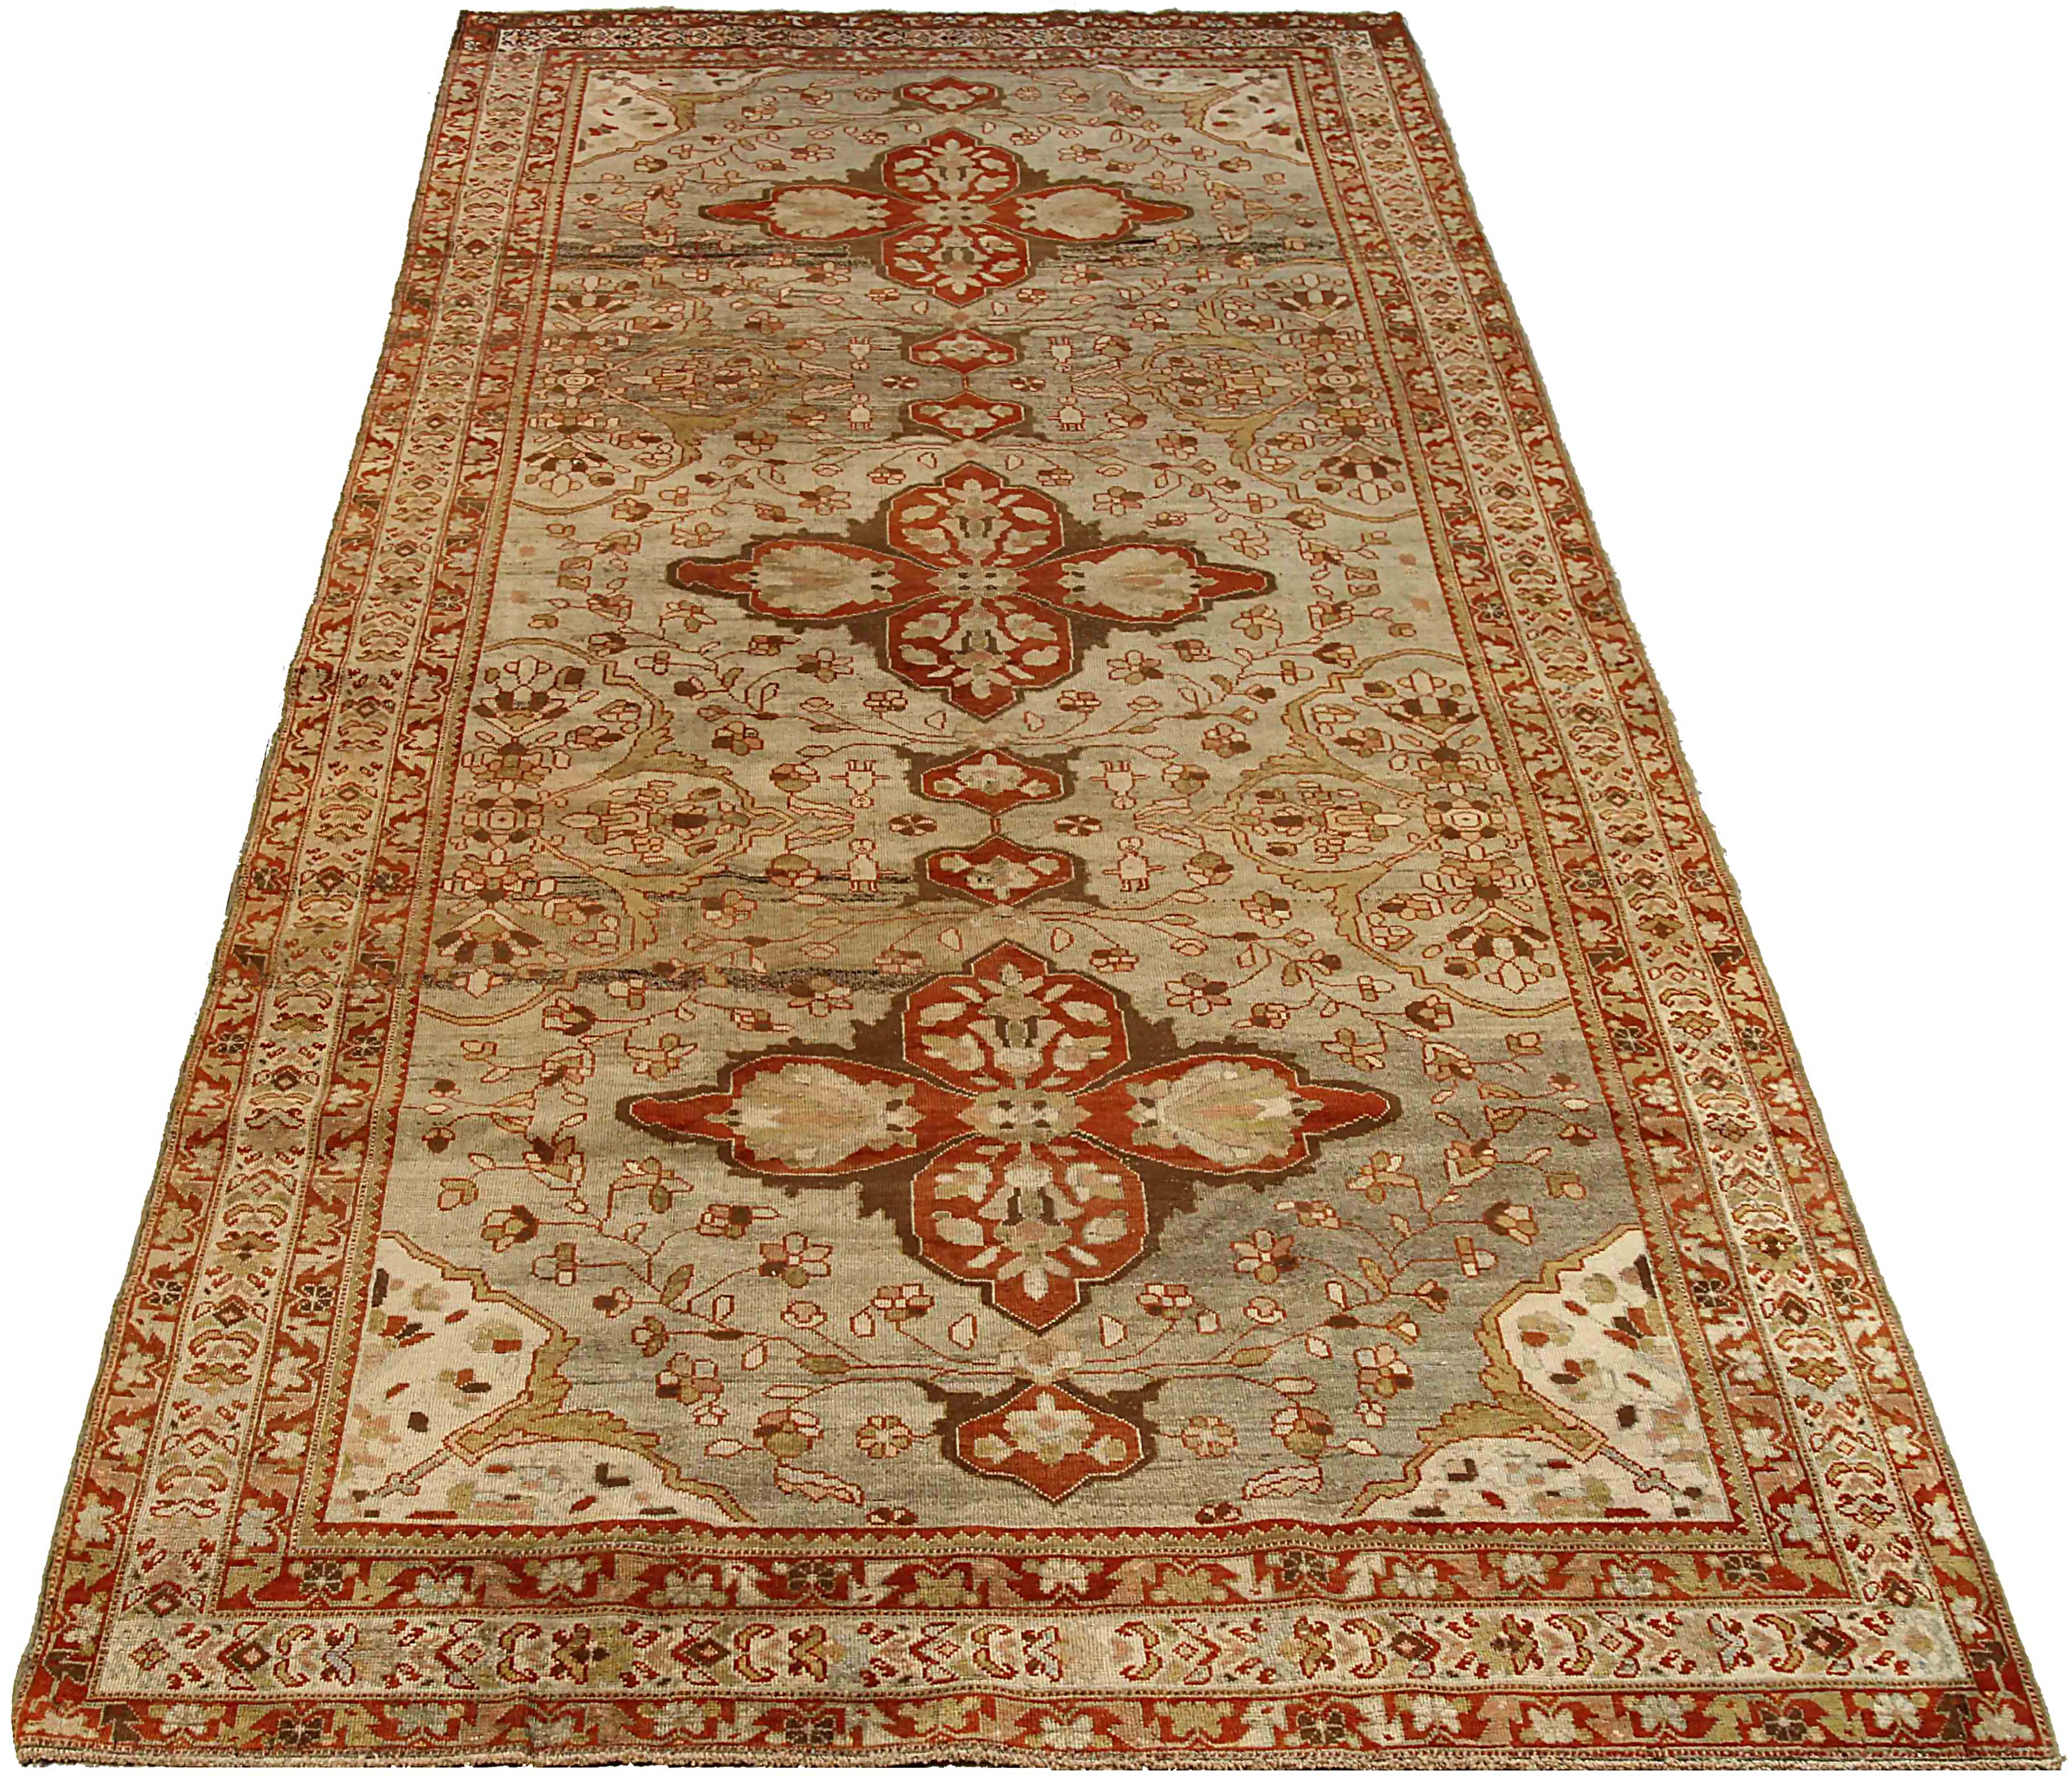 Antique Persian area rug handwoven from the finest sheep’s wool. It’s colored with all-natural vegetable dyes that are safe for humans and pets. It’s a traditional Farahan design handwoven by expert artisans. It’s a lovely area rug that can be